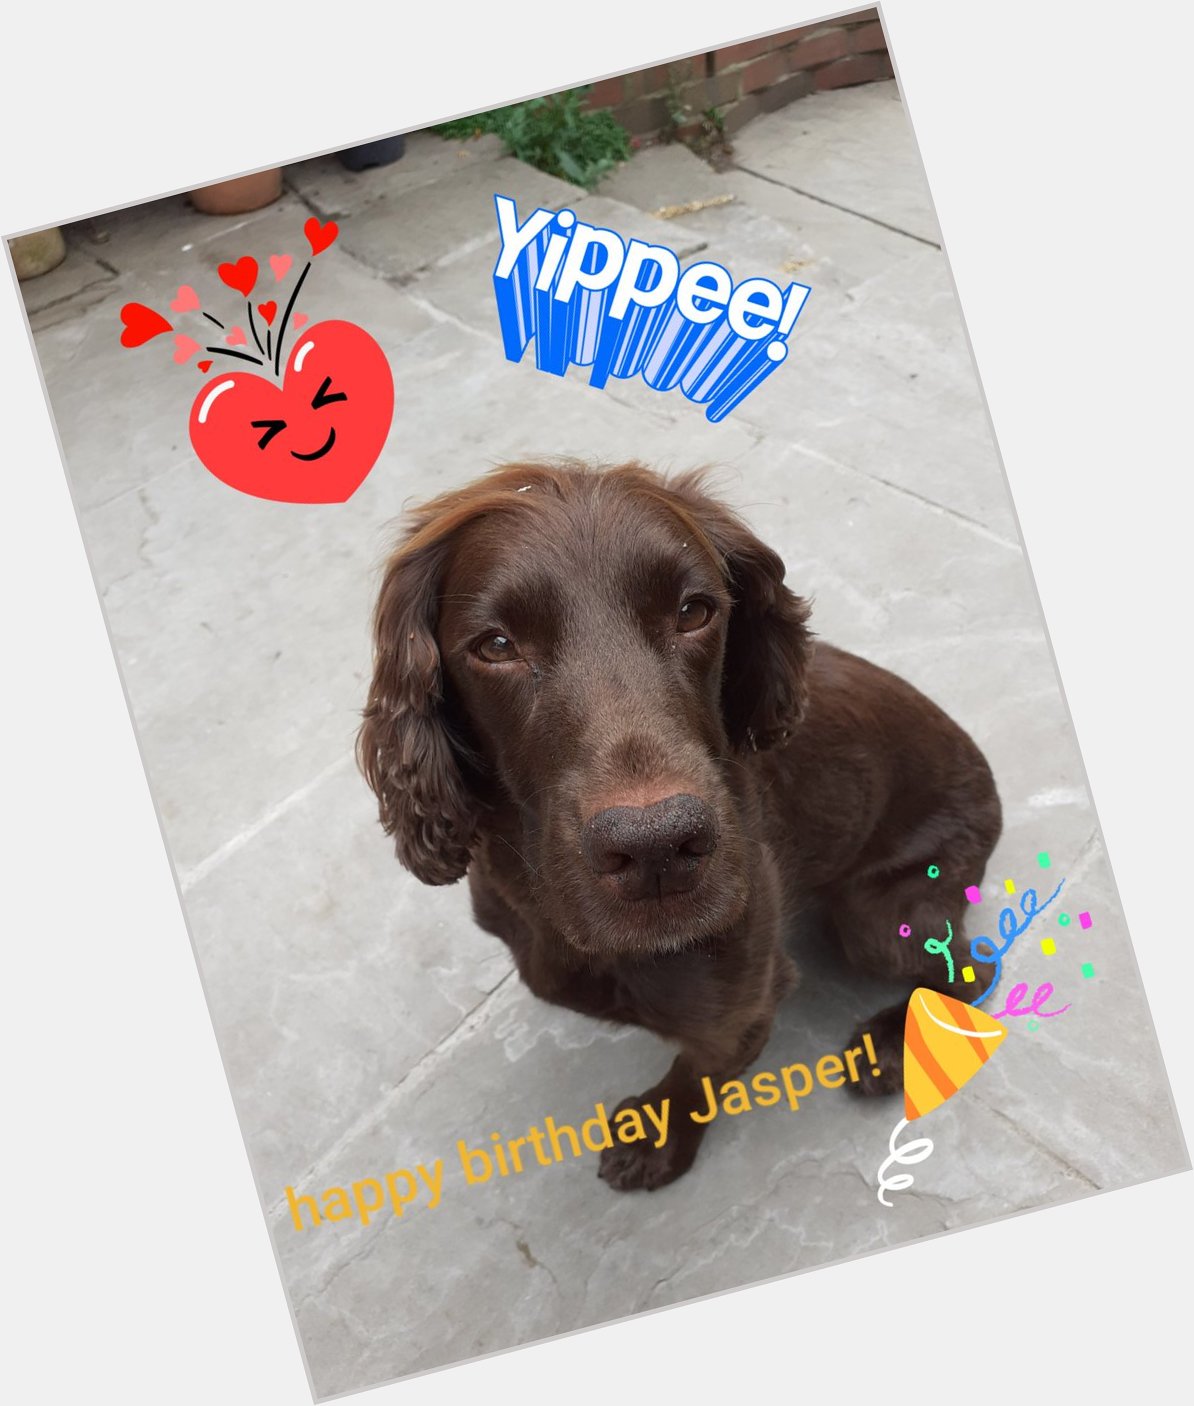 Three cheers for Jasper! Happy birthday buddy! love  Lil B and the Harvster     